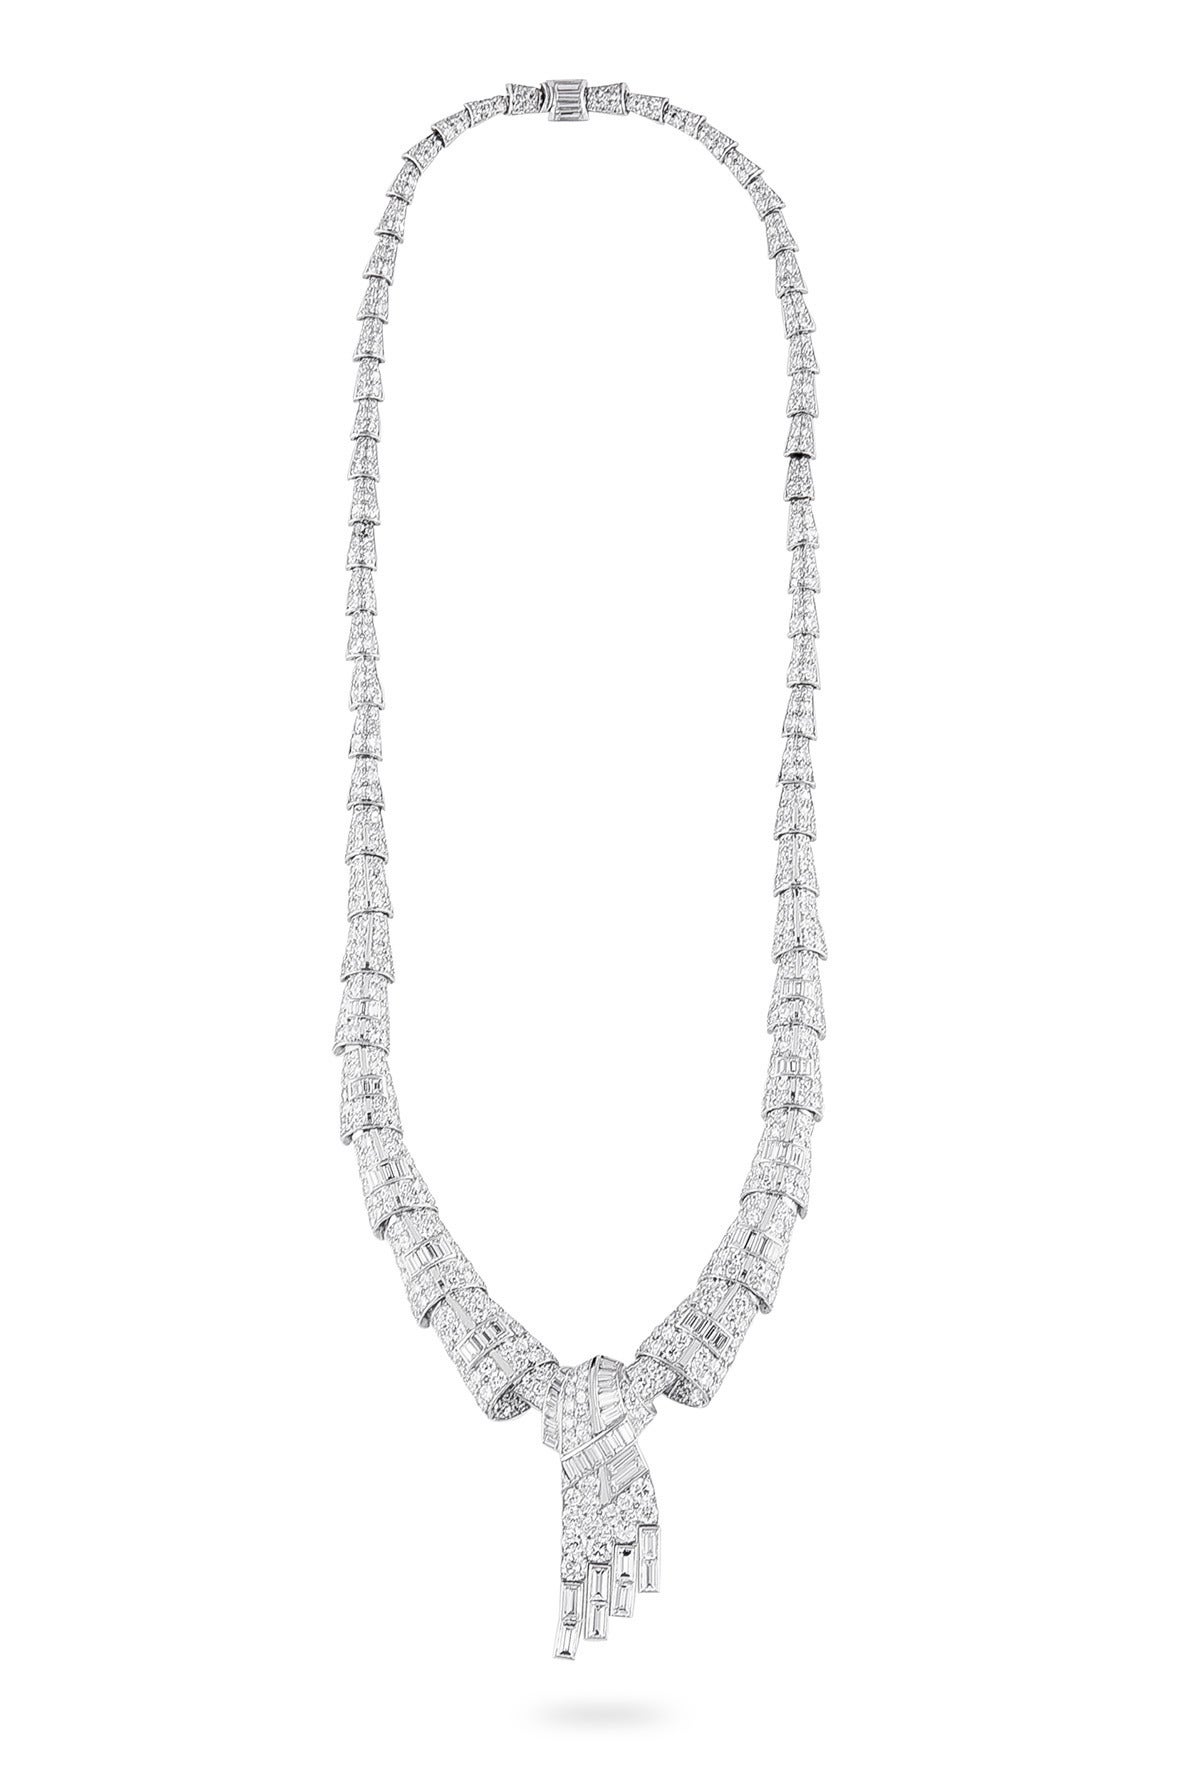 1930 Necklace in platinum paved with round and baguette cut diamonds, length 39cm, pattern height 4cm (40,35grs)